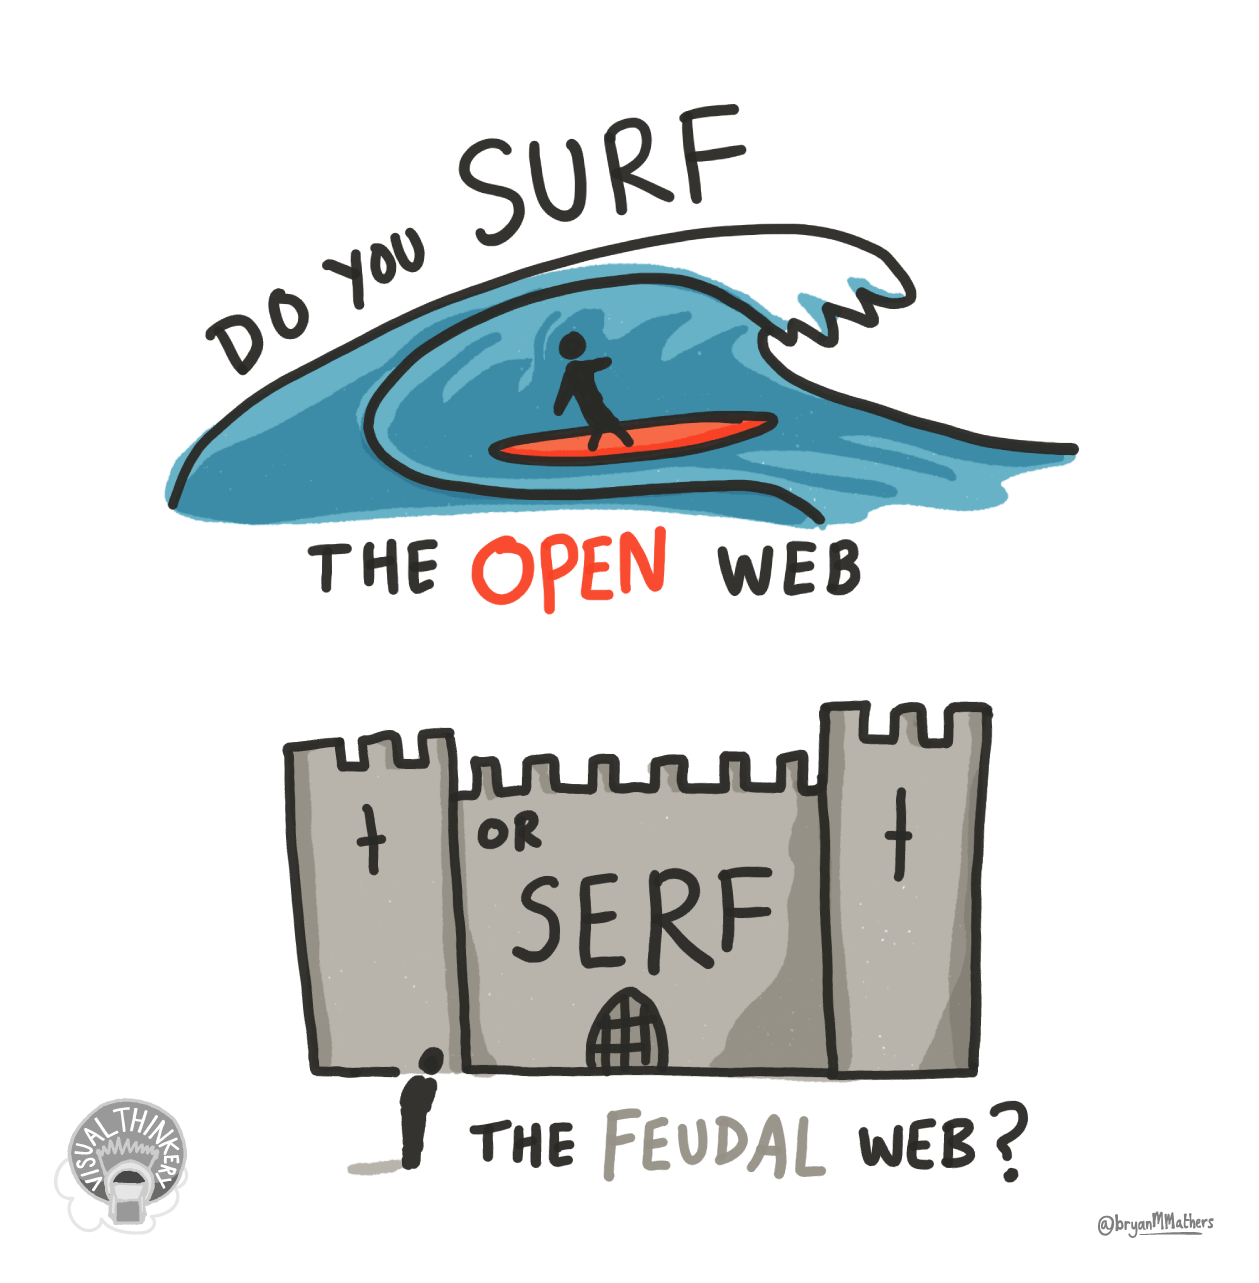 The Open Web